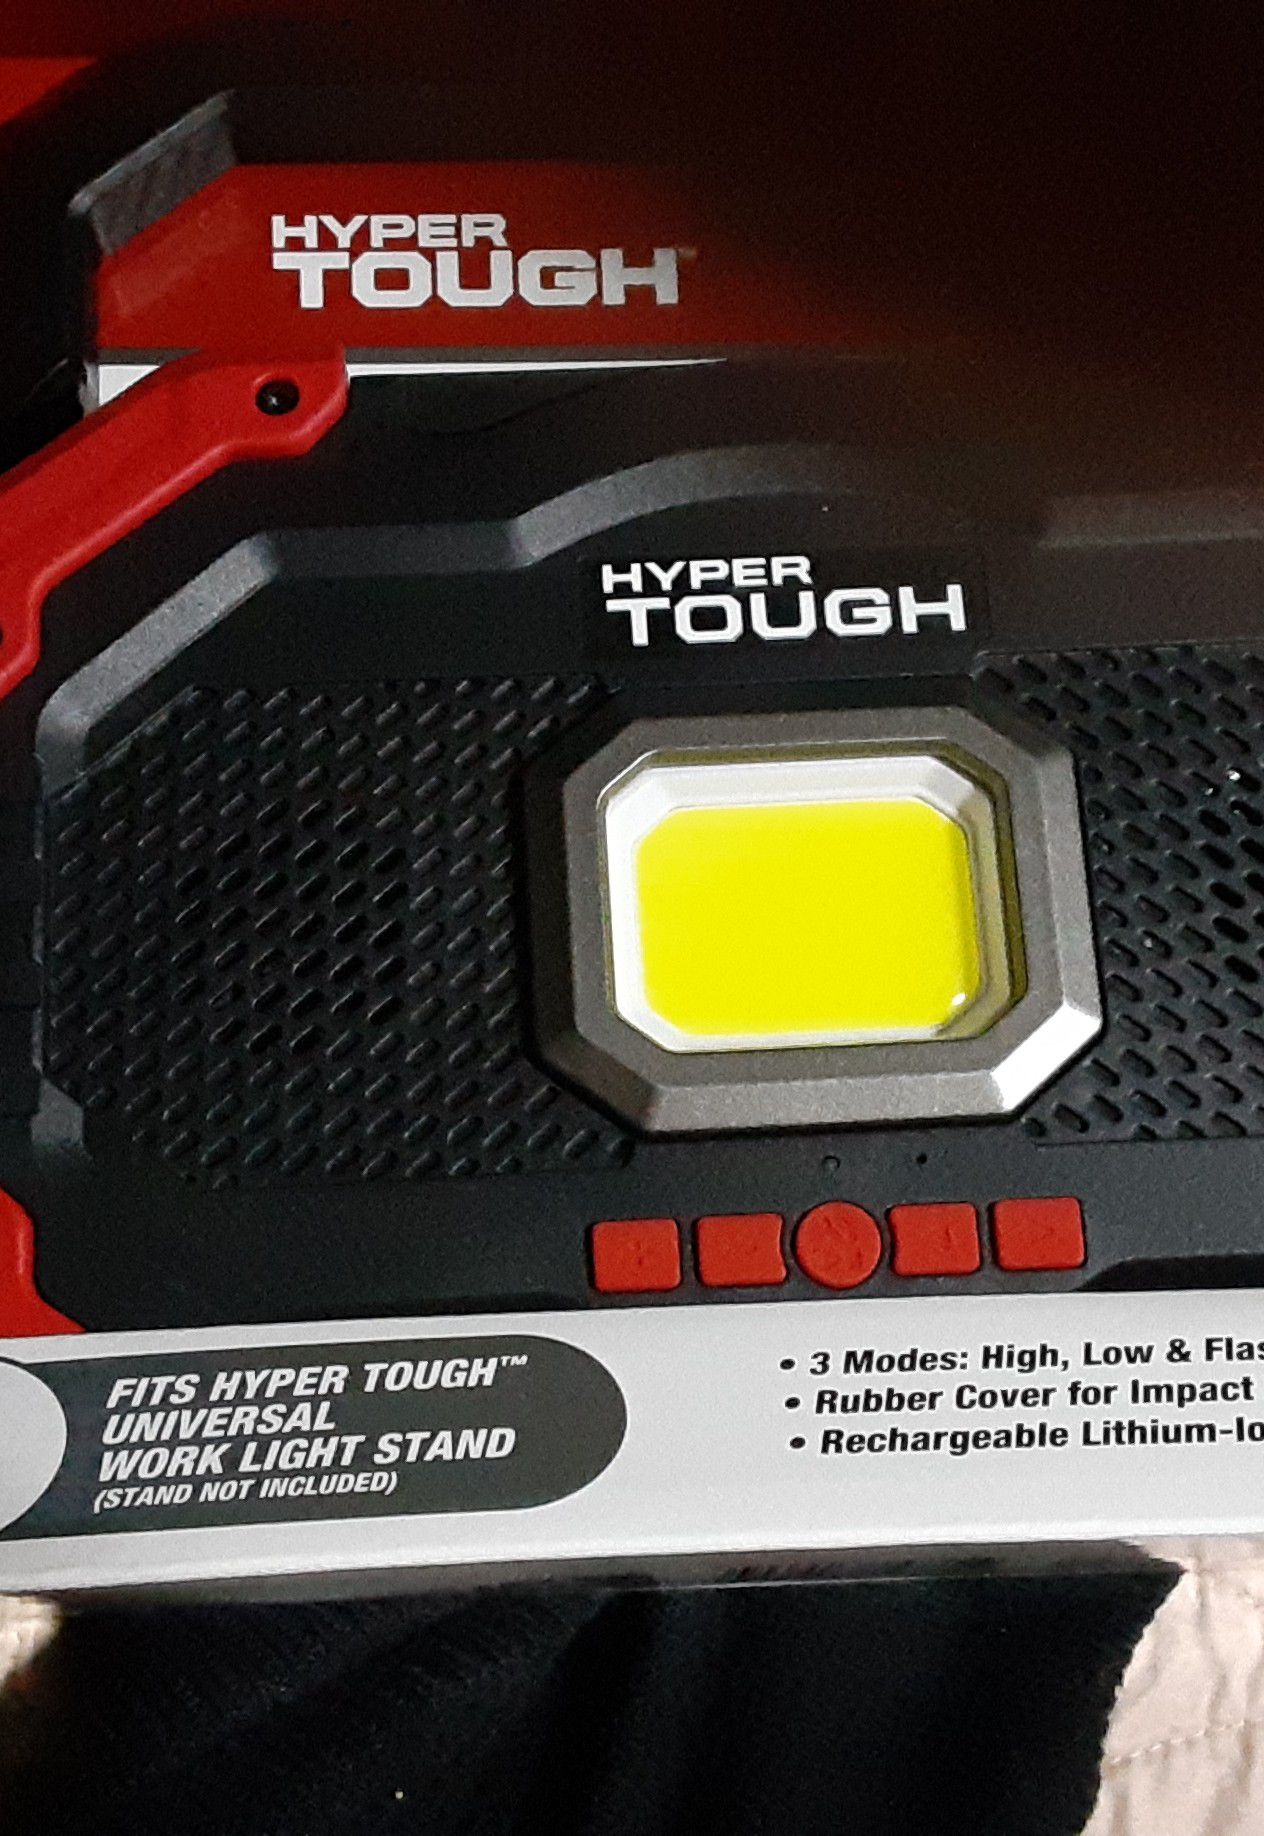 Hyper tough rechargeable worklight with bluetooth speaker